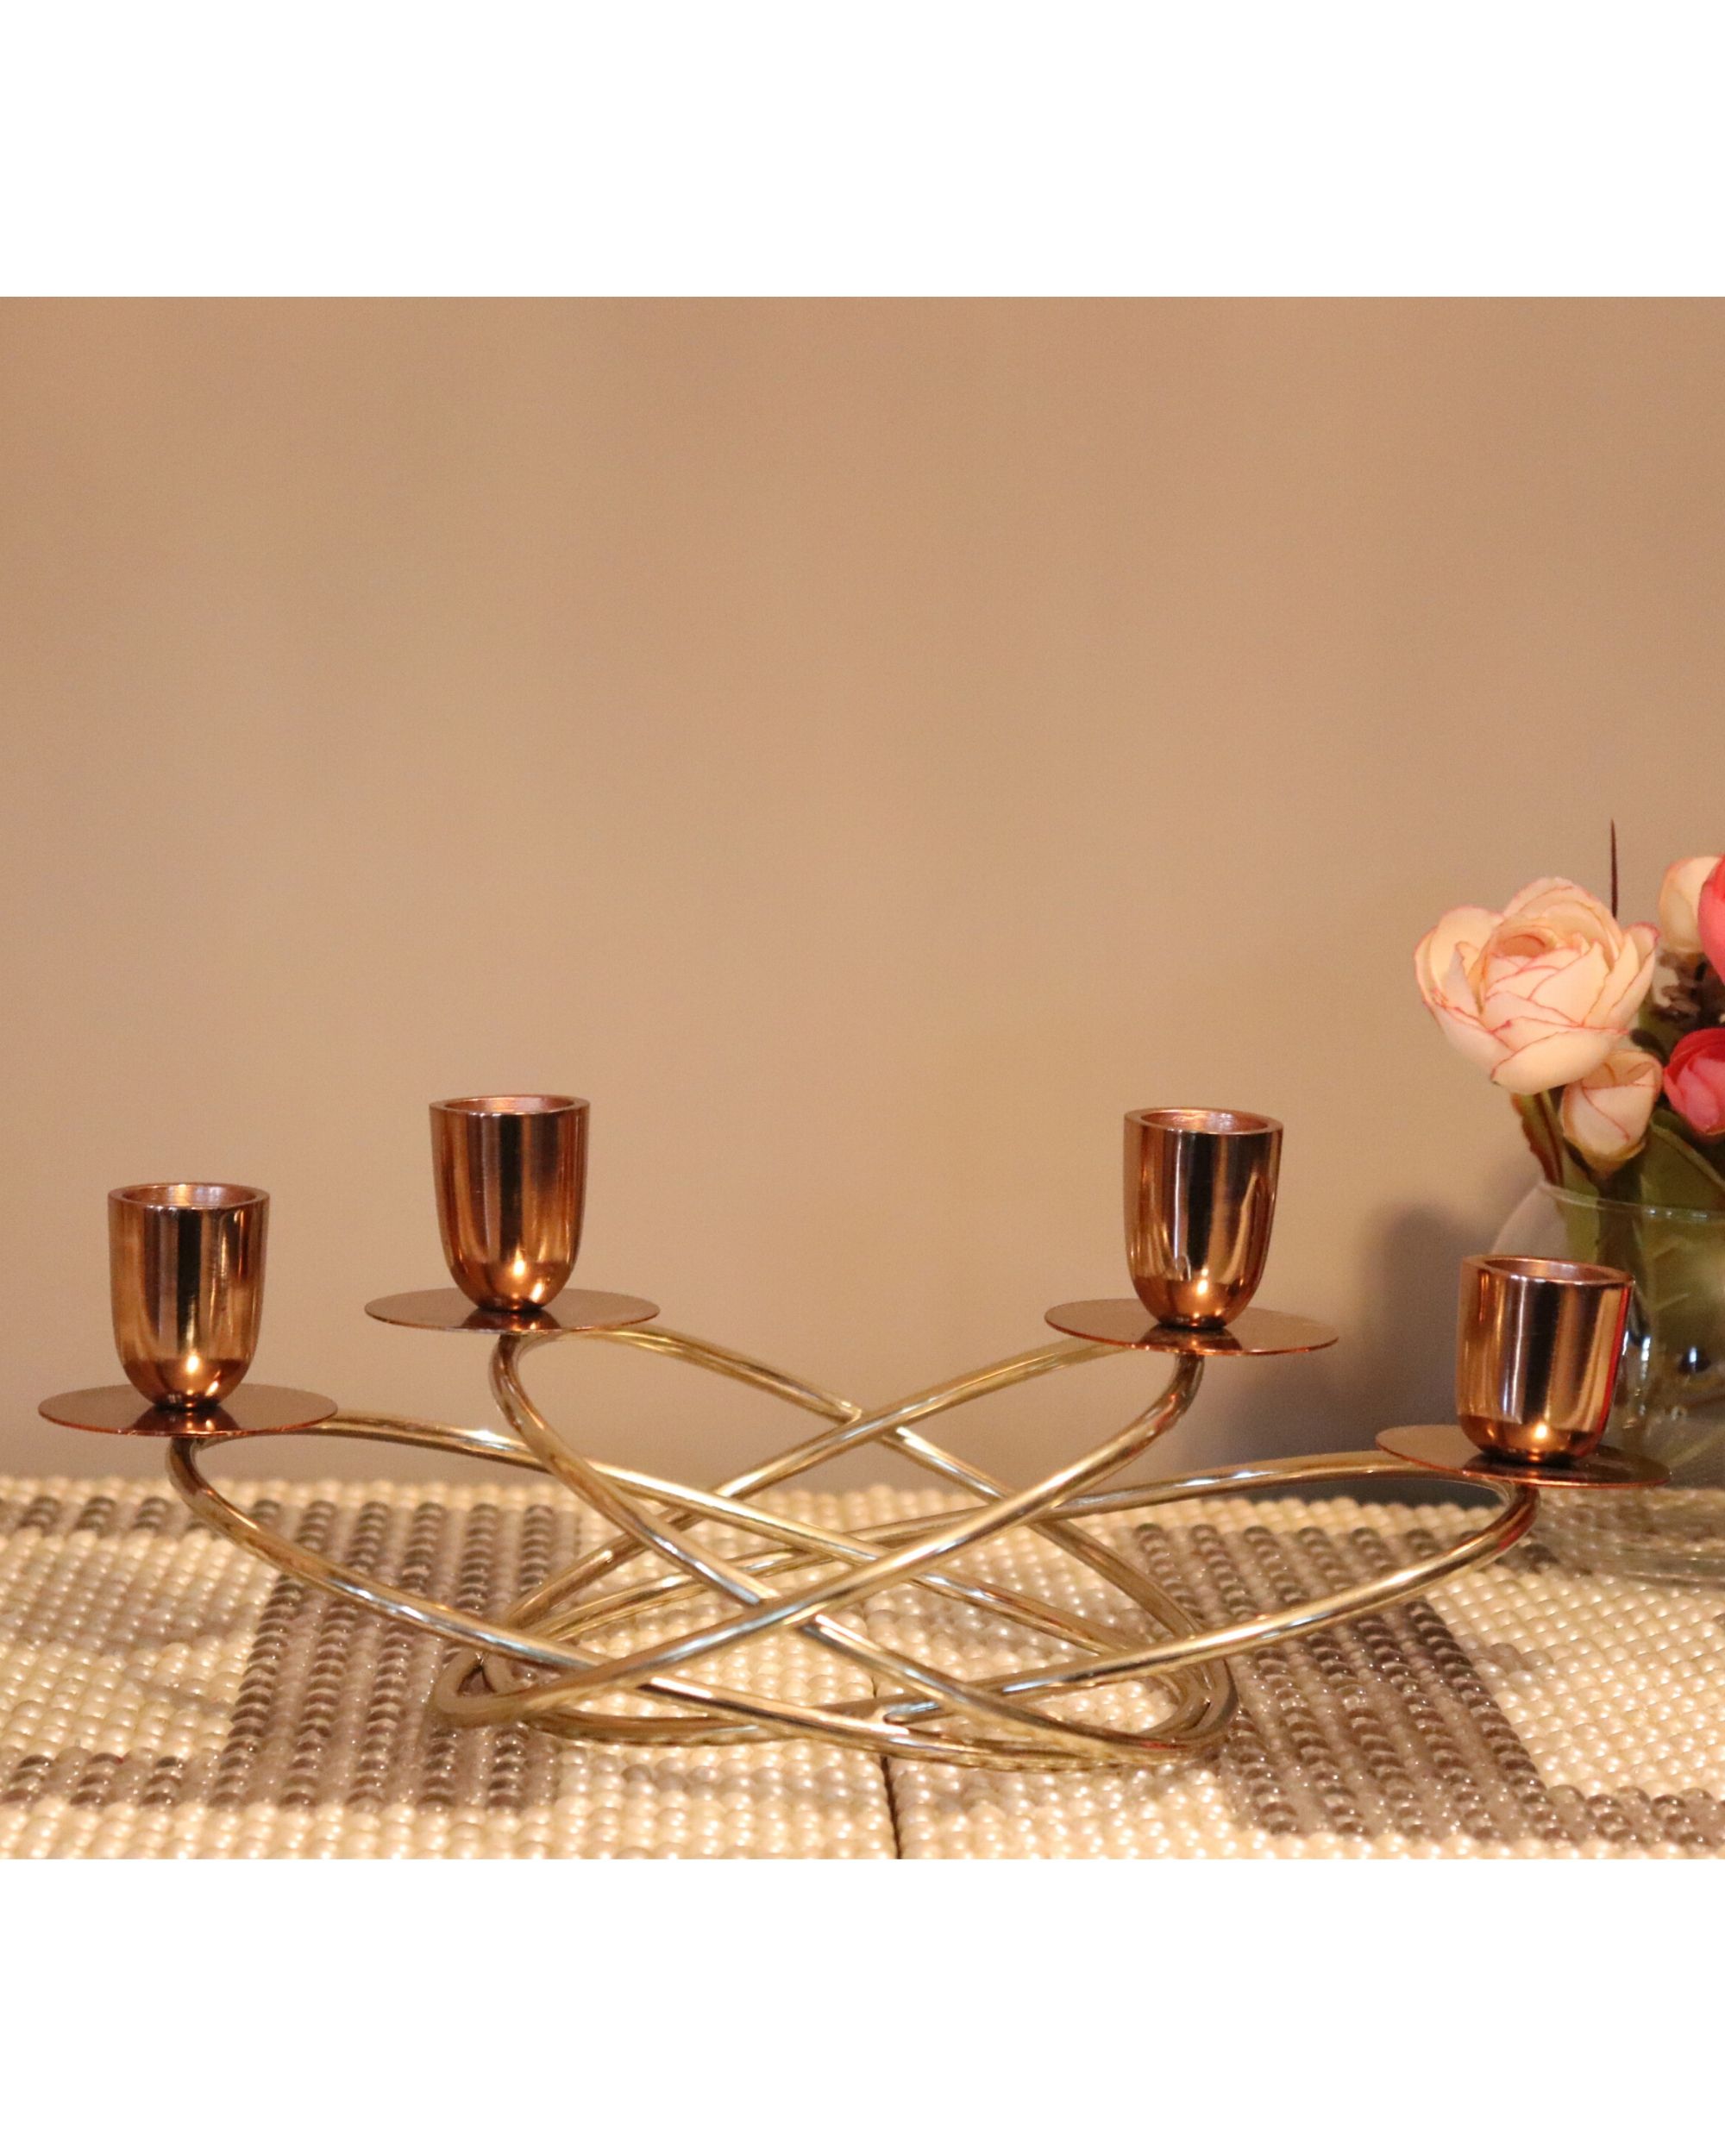 Aluminum and steel candelabra for four candles